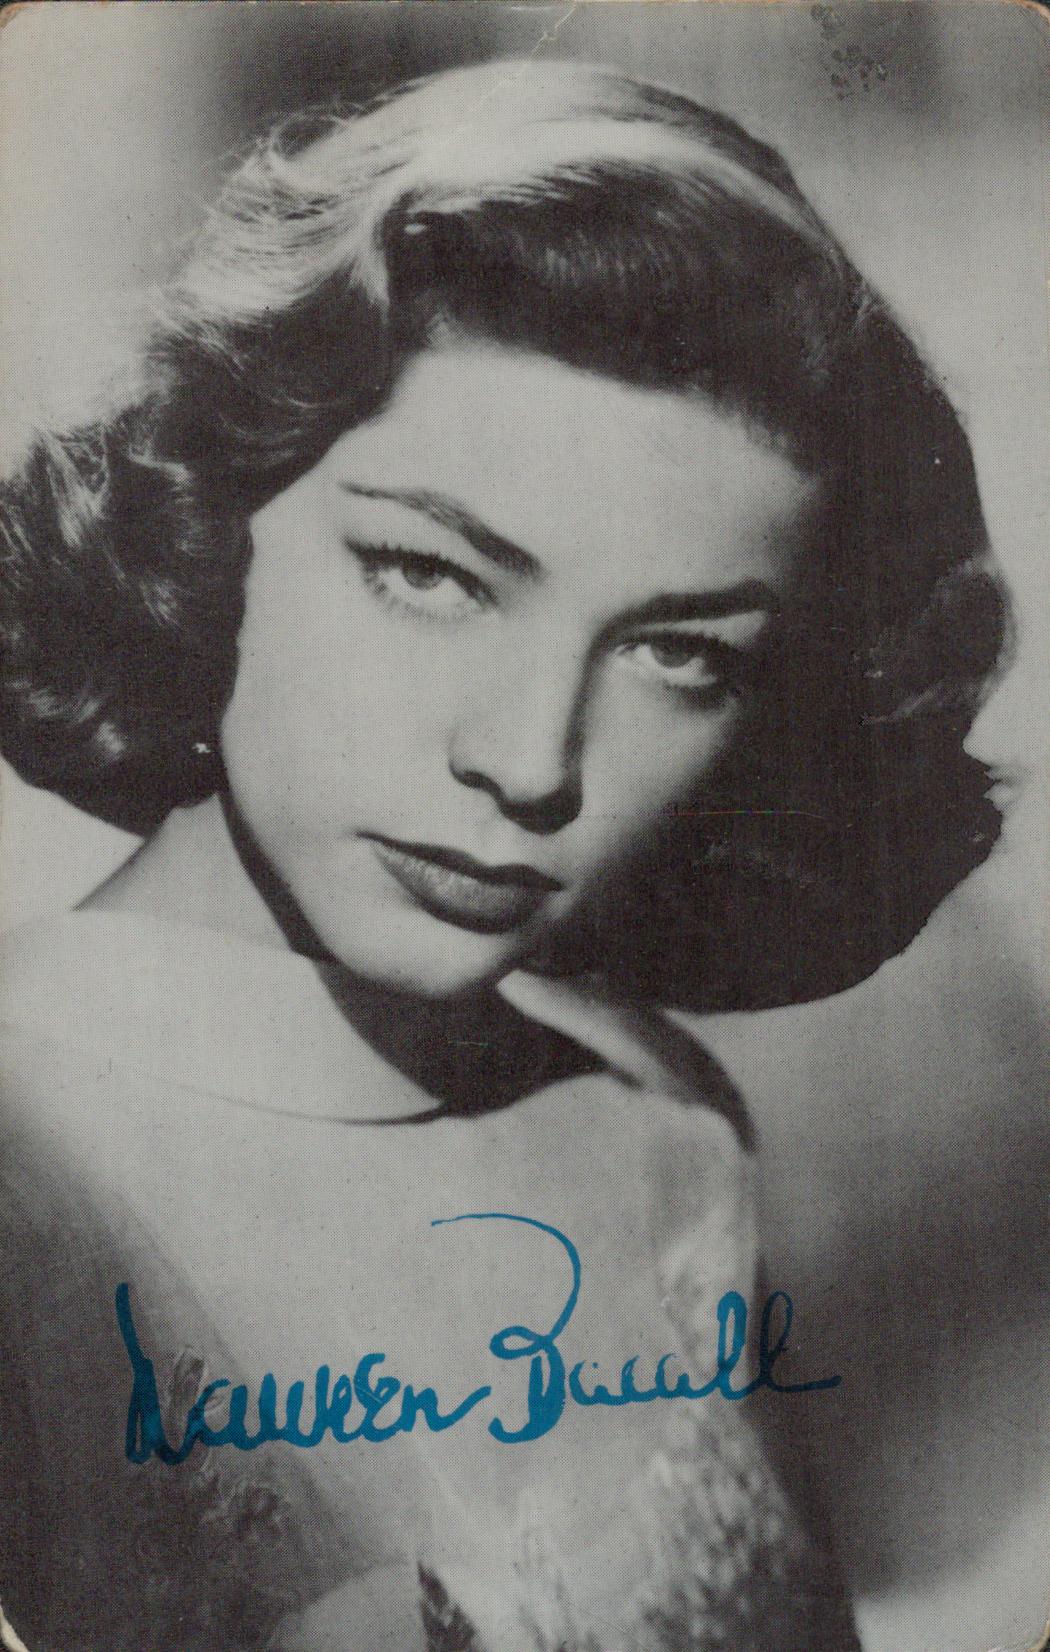 Lauren Bacall signed Black and White Post Card 5.5x3.5 Inch. Was an American actress. Good